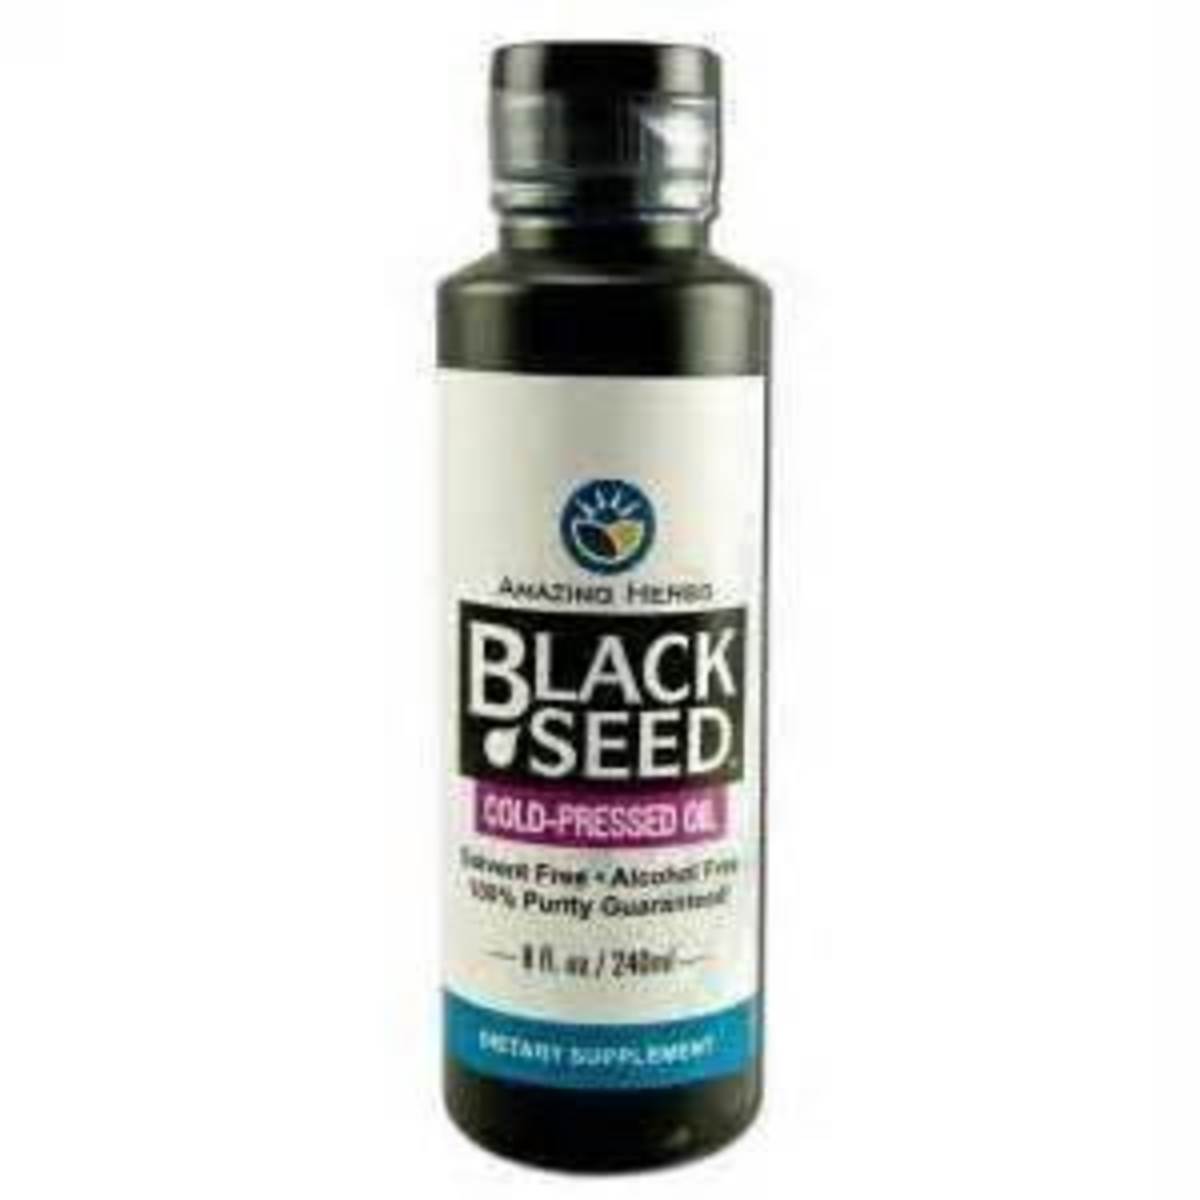 Amazing Black Seed Oil: Does it Cure Everything But Death and Make Your Hair Grow?